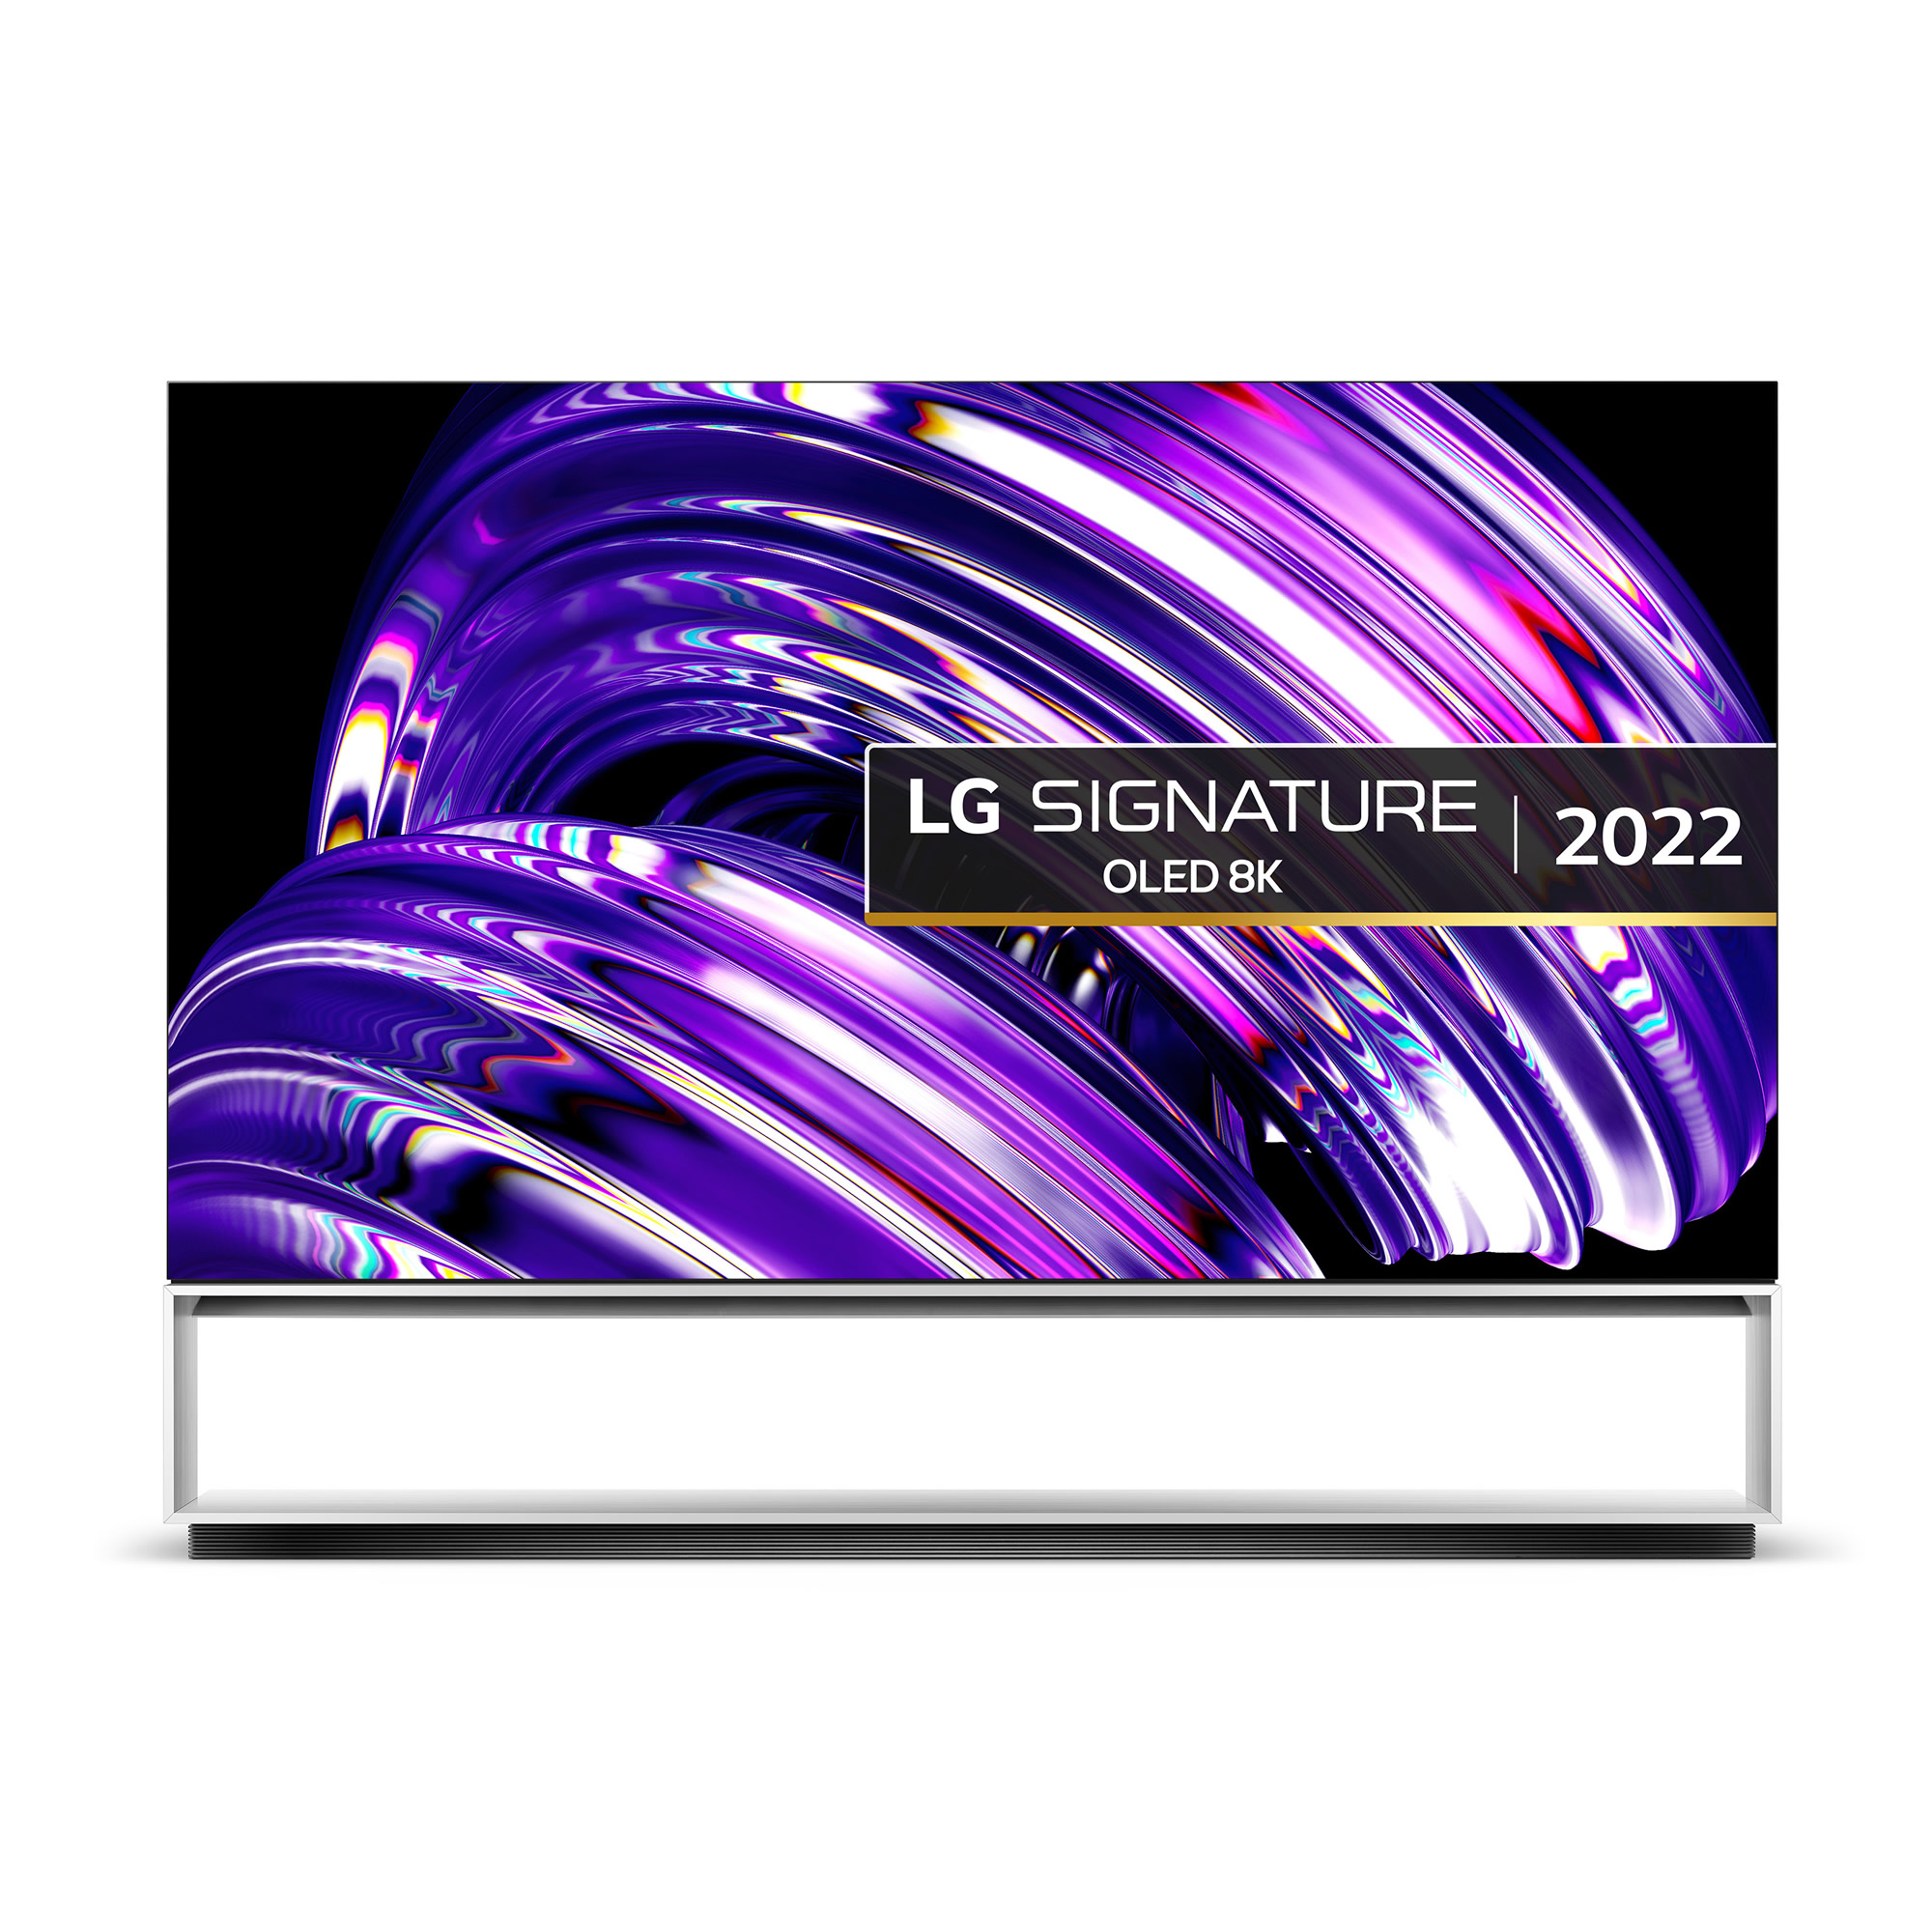 LG 88inch OLED HDR 8K UHD SMART TV WiFi Dolby Atmos